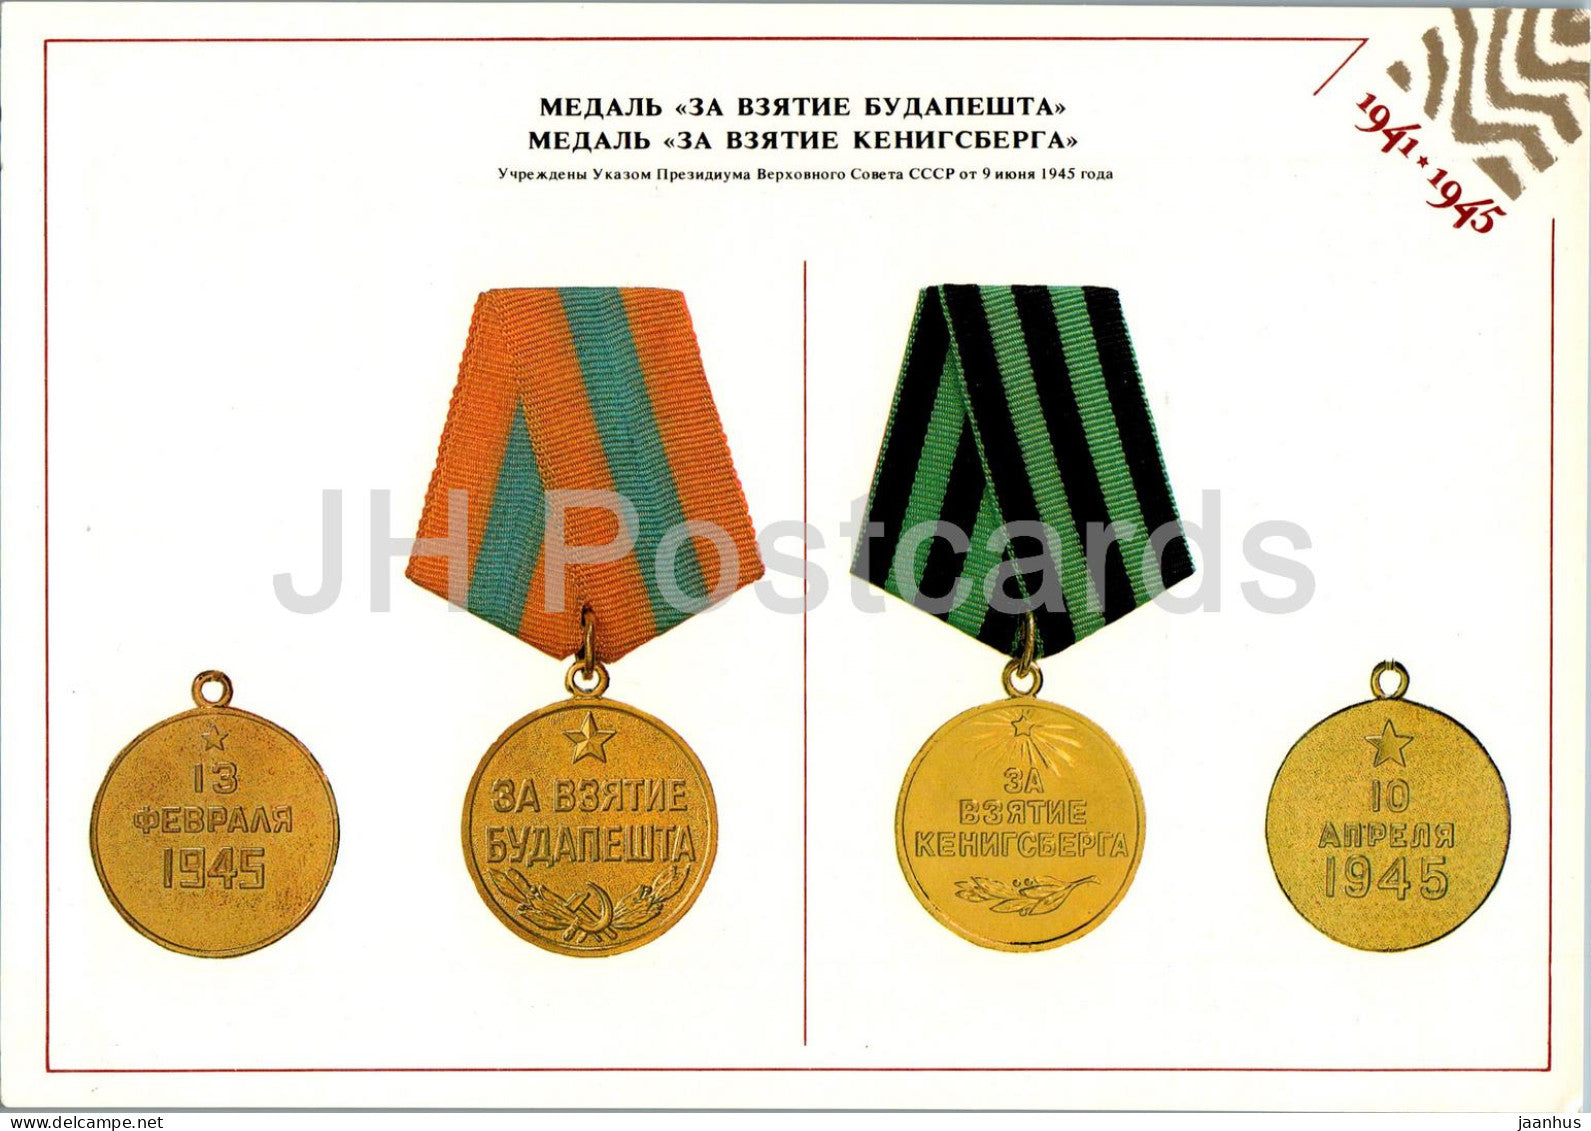 Medal for the capture of Budapest - Orders and Medals of the USSR - Large Format Card - 1985 - Russia USSR - unused - JH Postcards